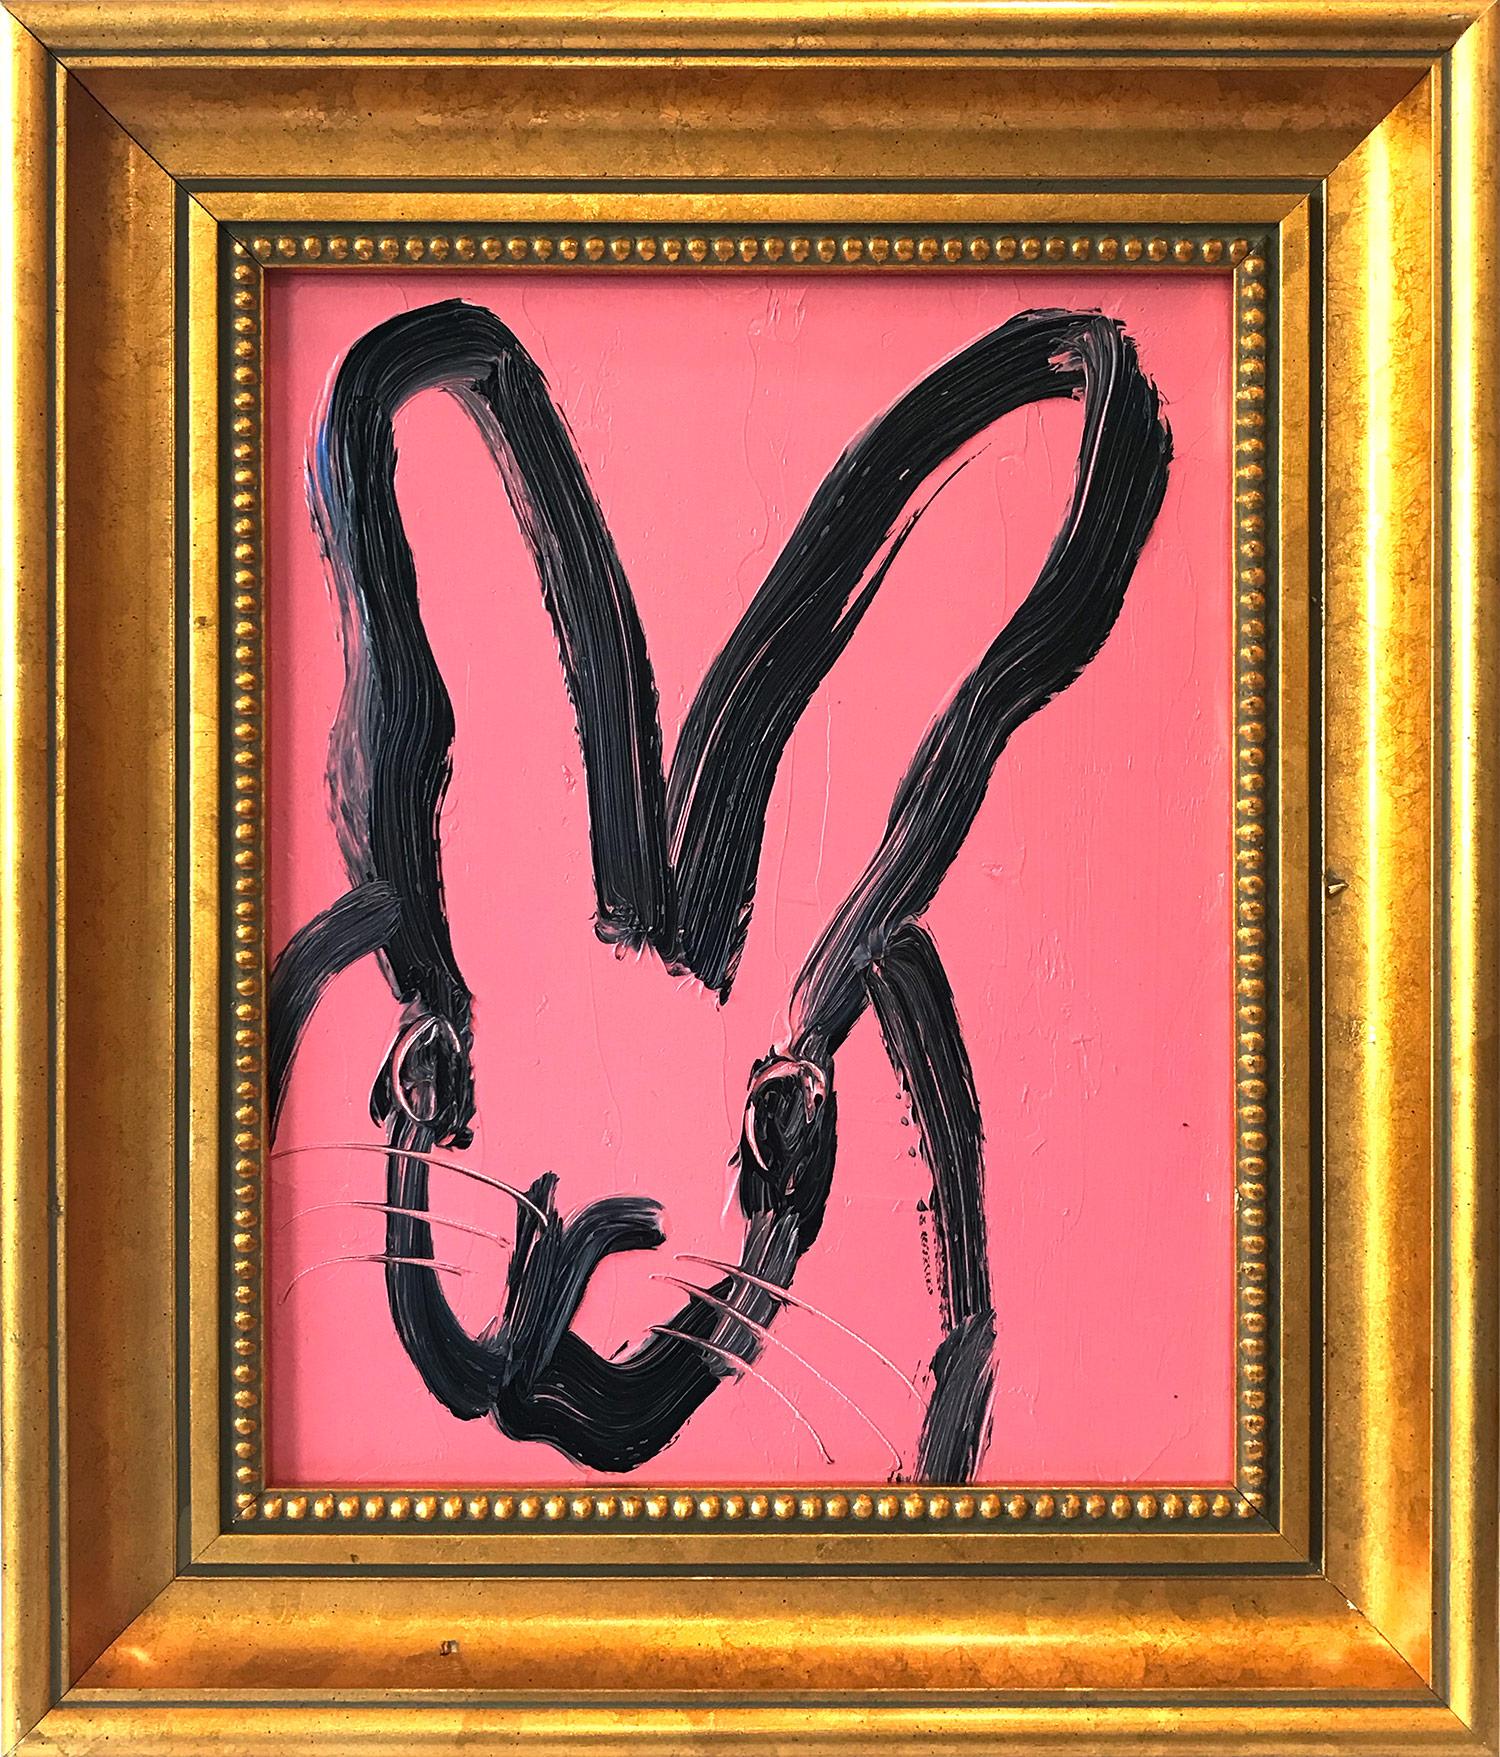 Hunt Slonem Animal Painting - "Untitled" (Black Bunny on Creamy Pink Background Oil Painting on Wood Panel)